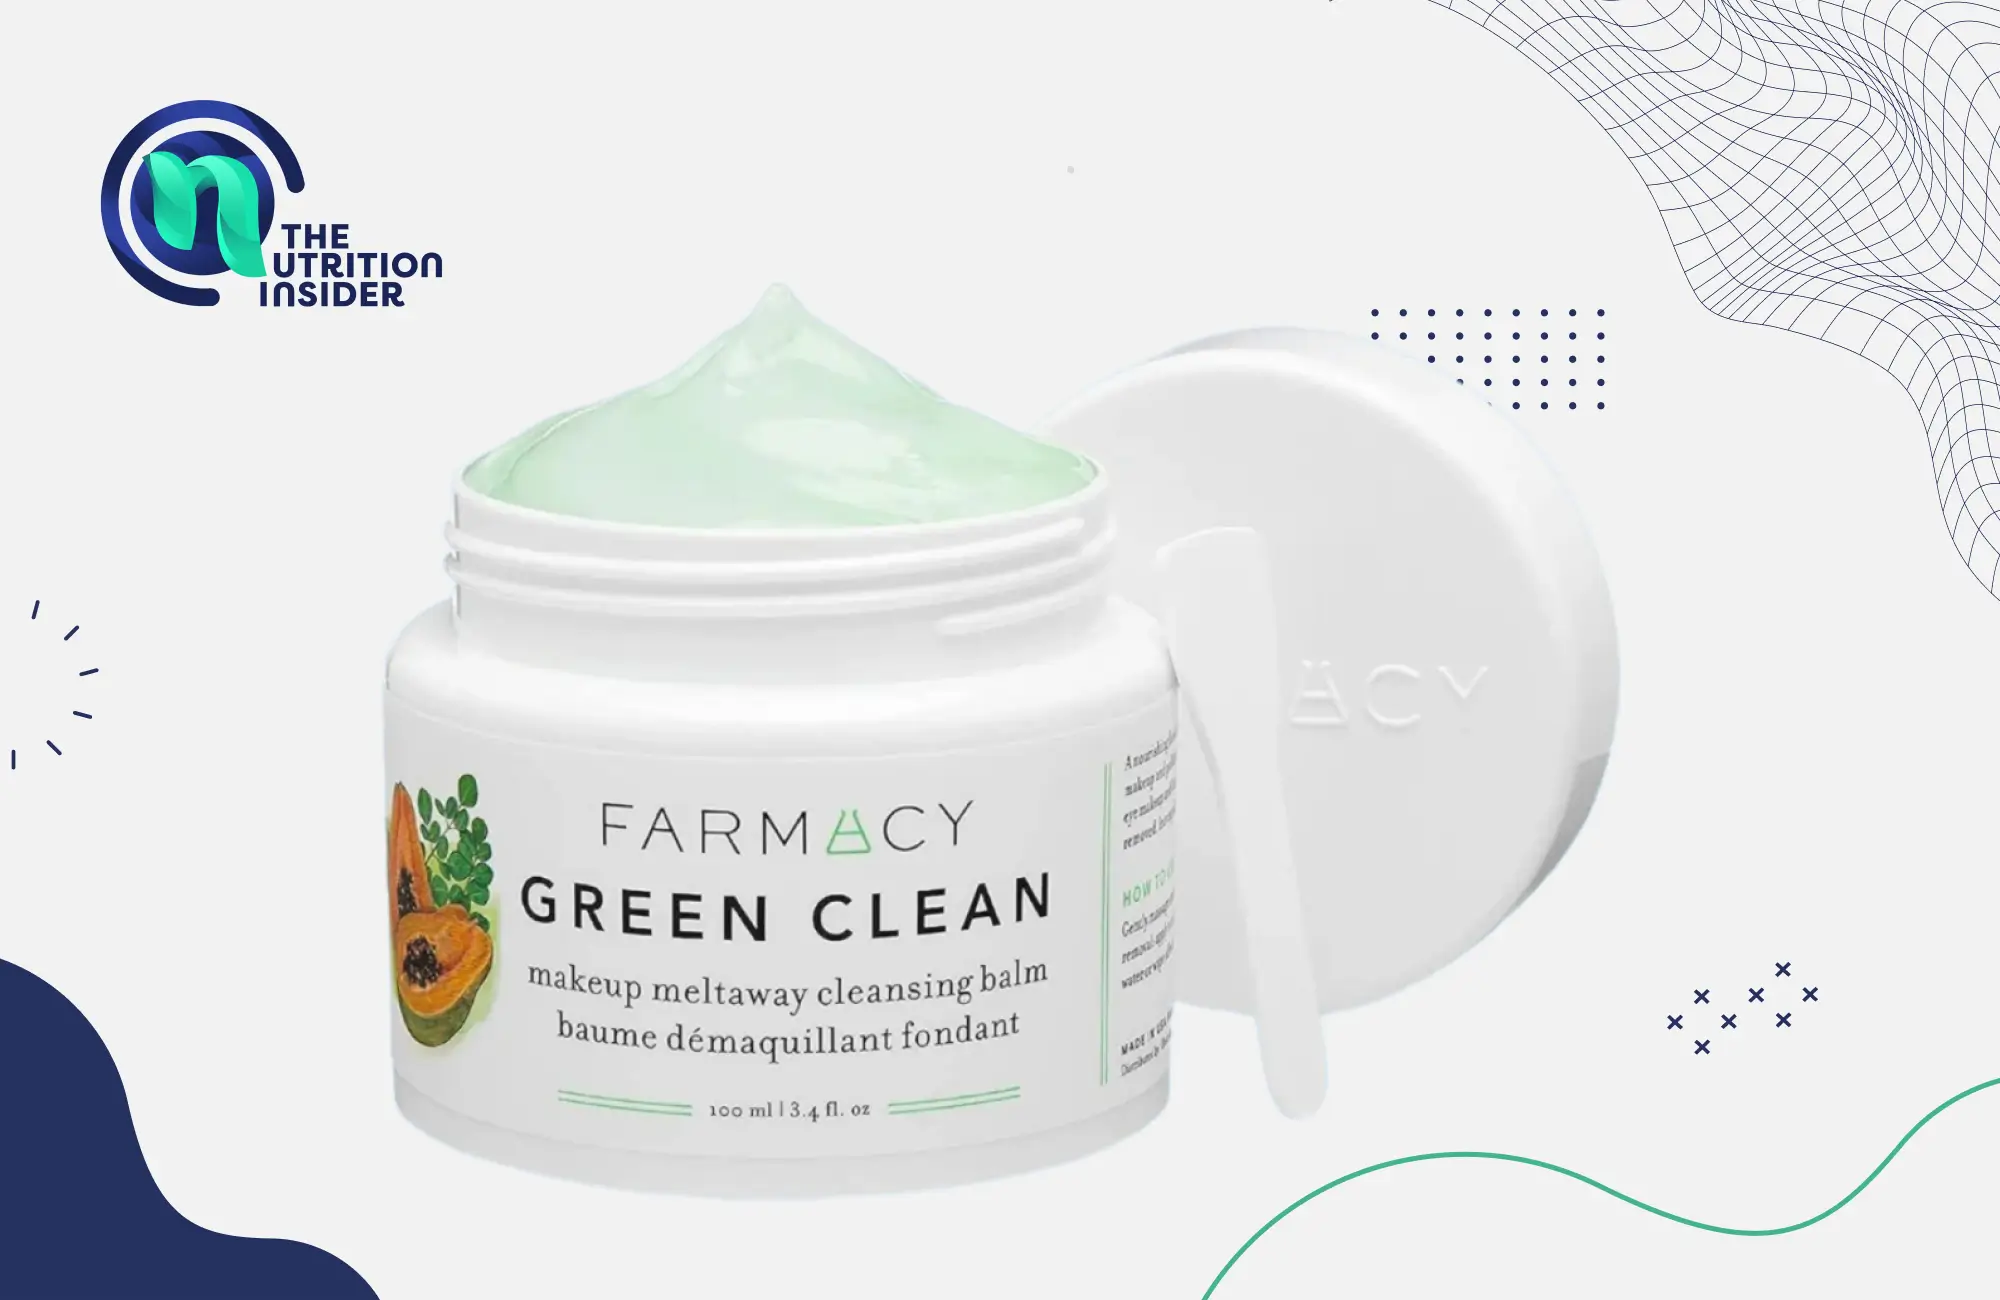 Image of farmacy green clean cleansing balm.